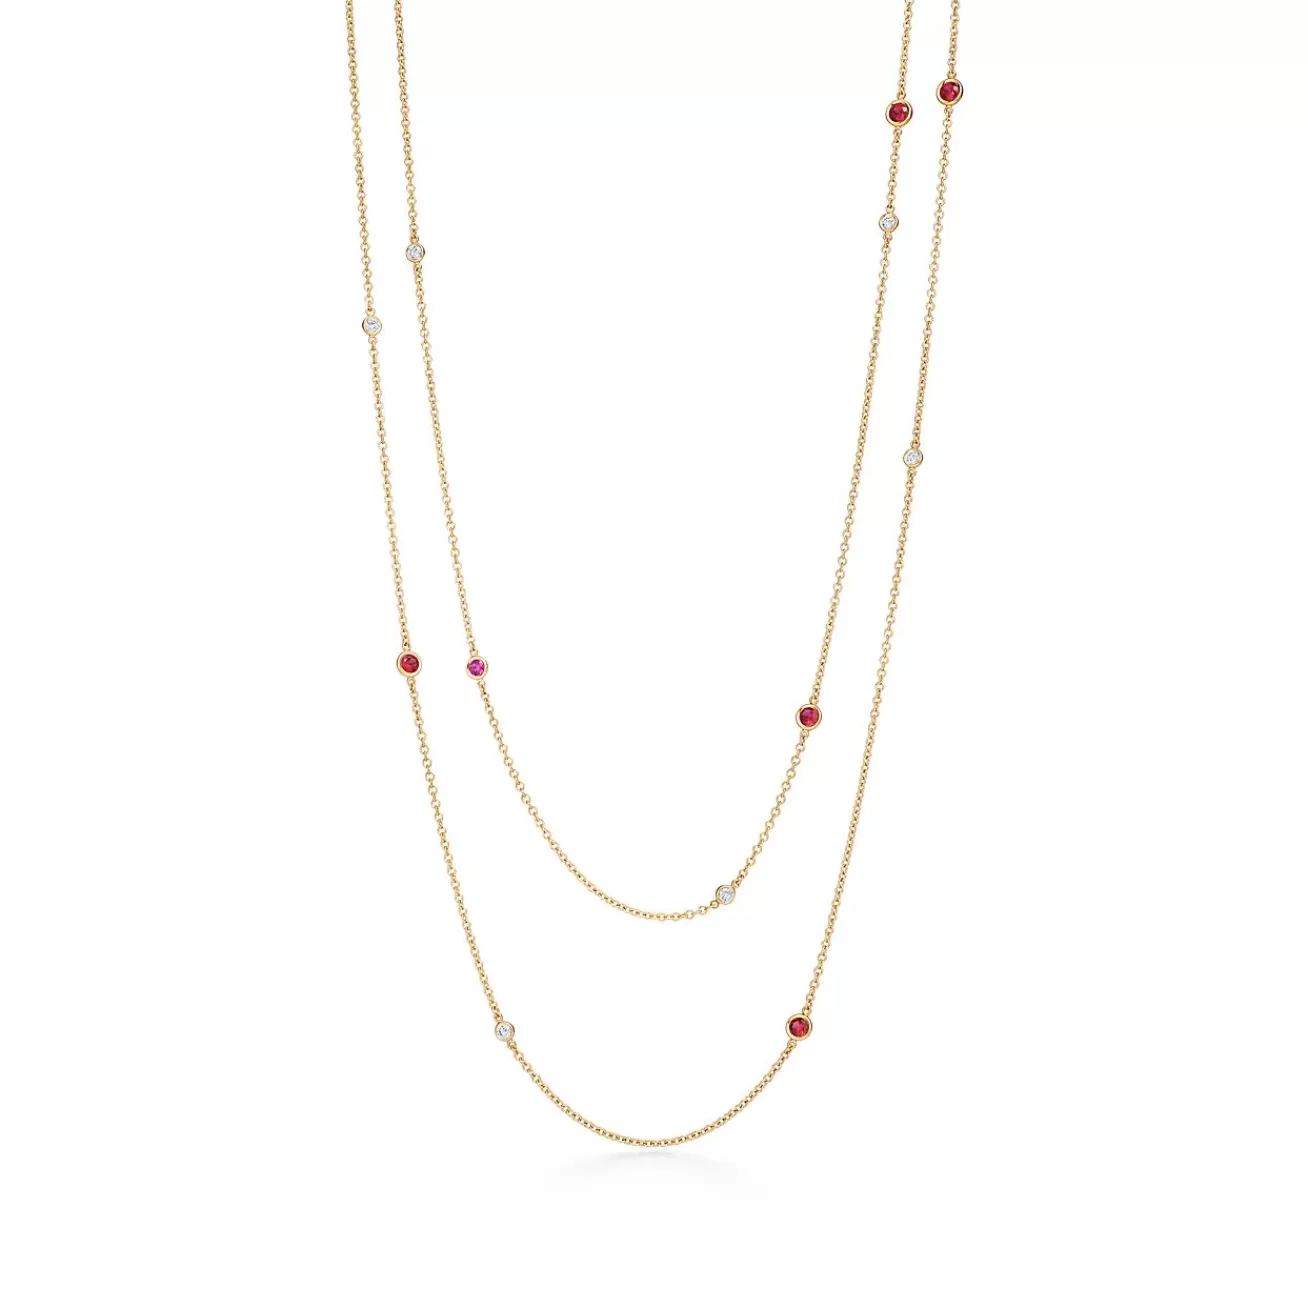 Tiffany & Co. Elsa Peretti® Color by the Yard sprinkle necklace in 18k gold with gemstones. | ^ Necklaces & Pendants | Gold Jewelry